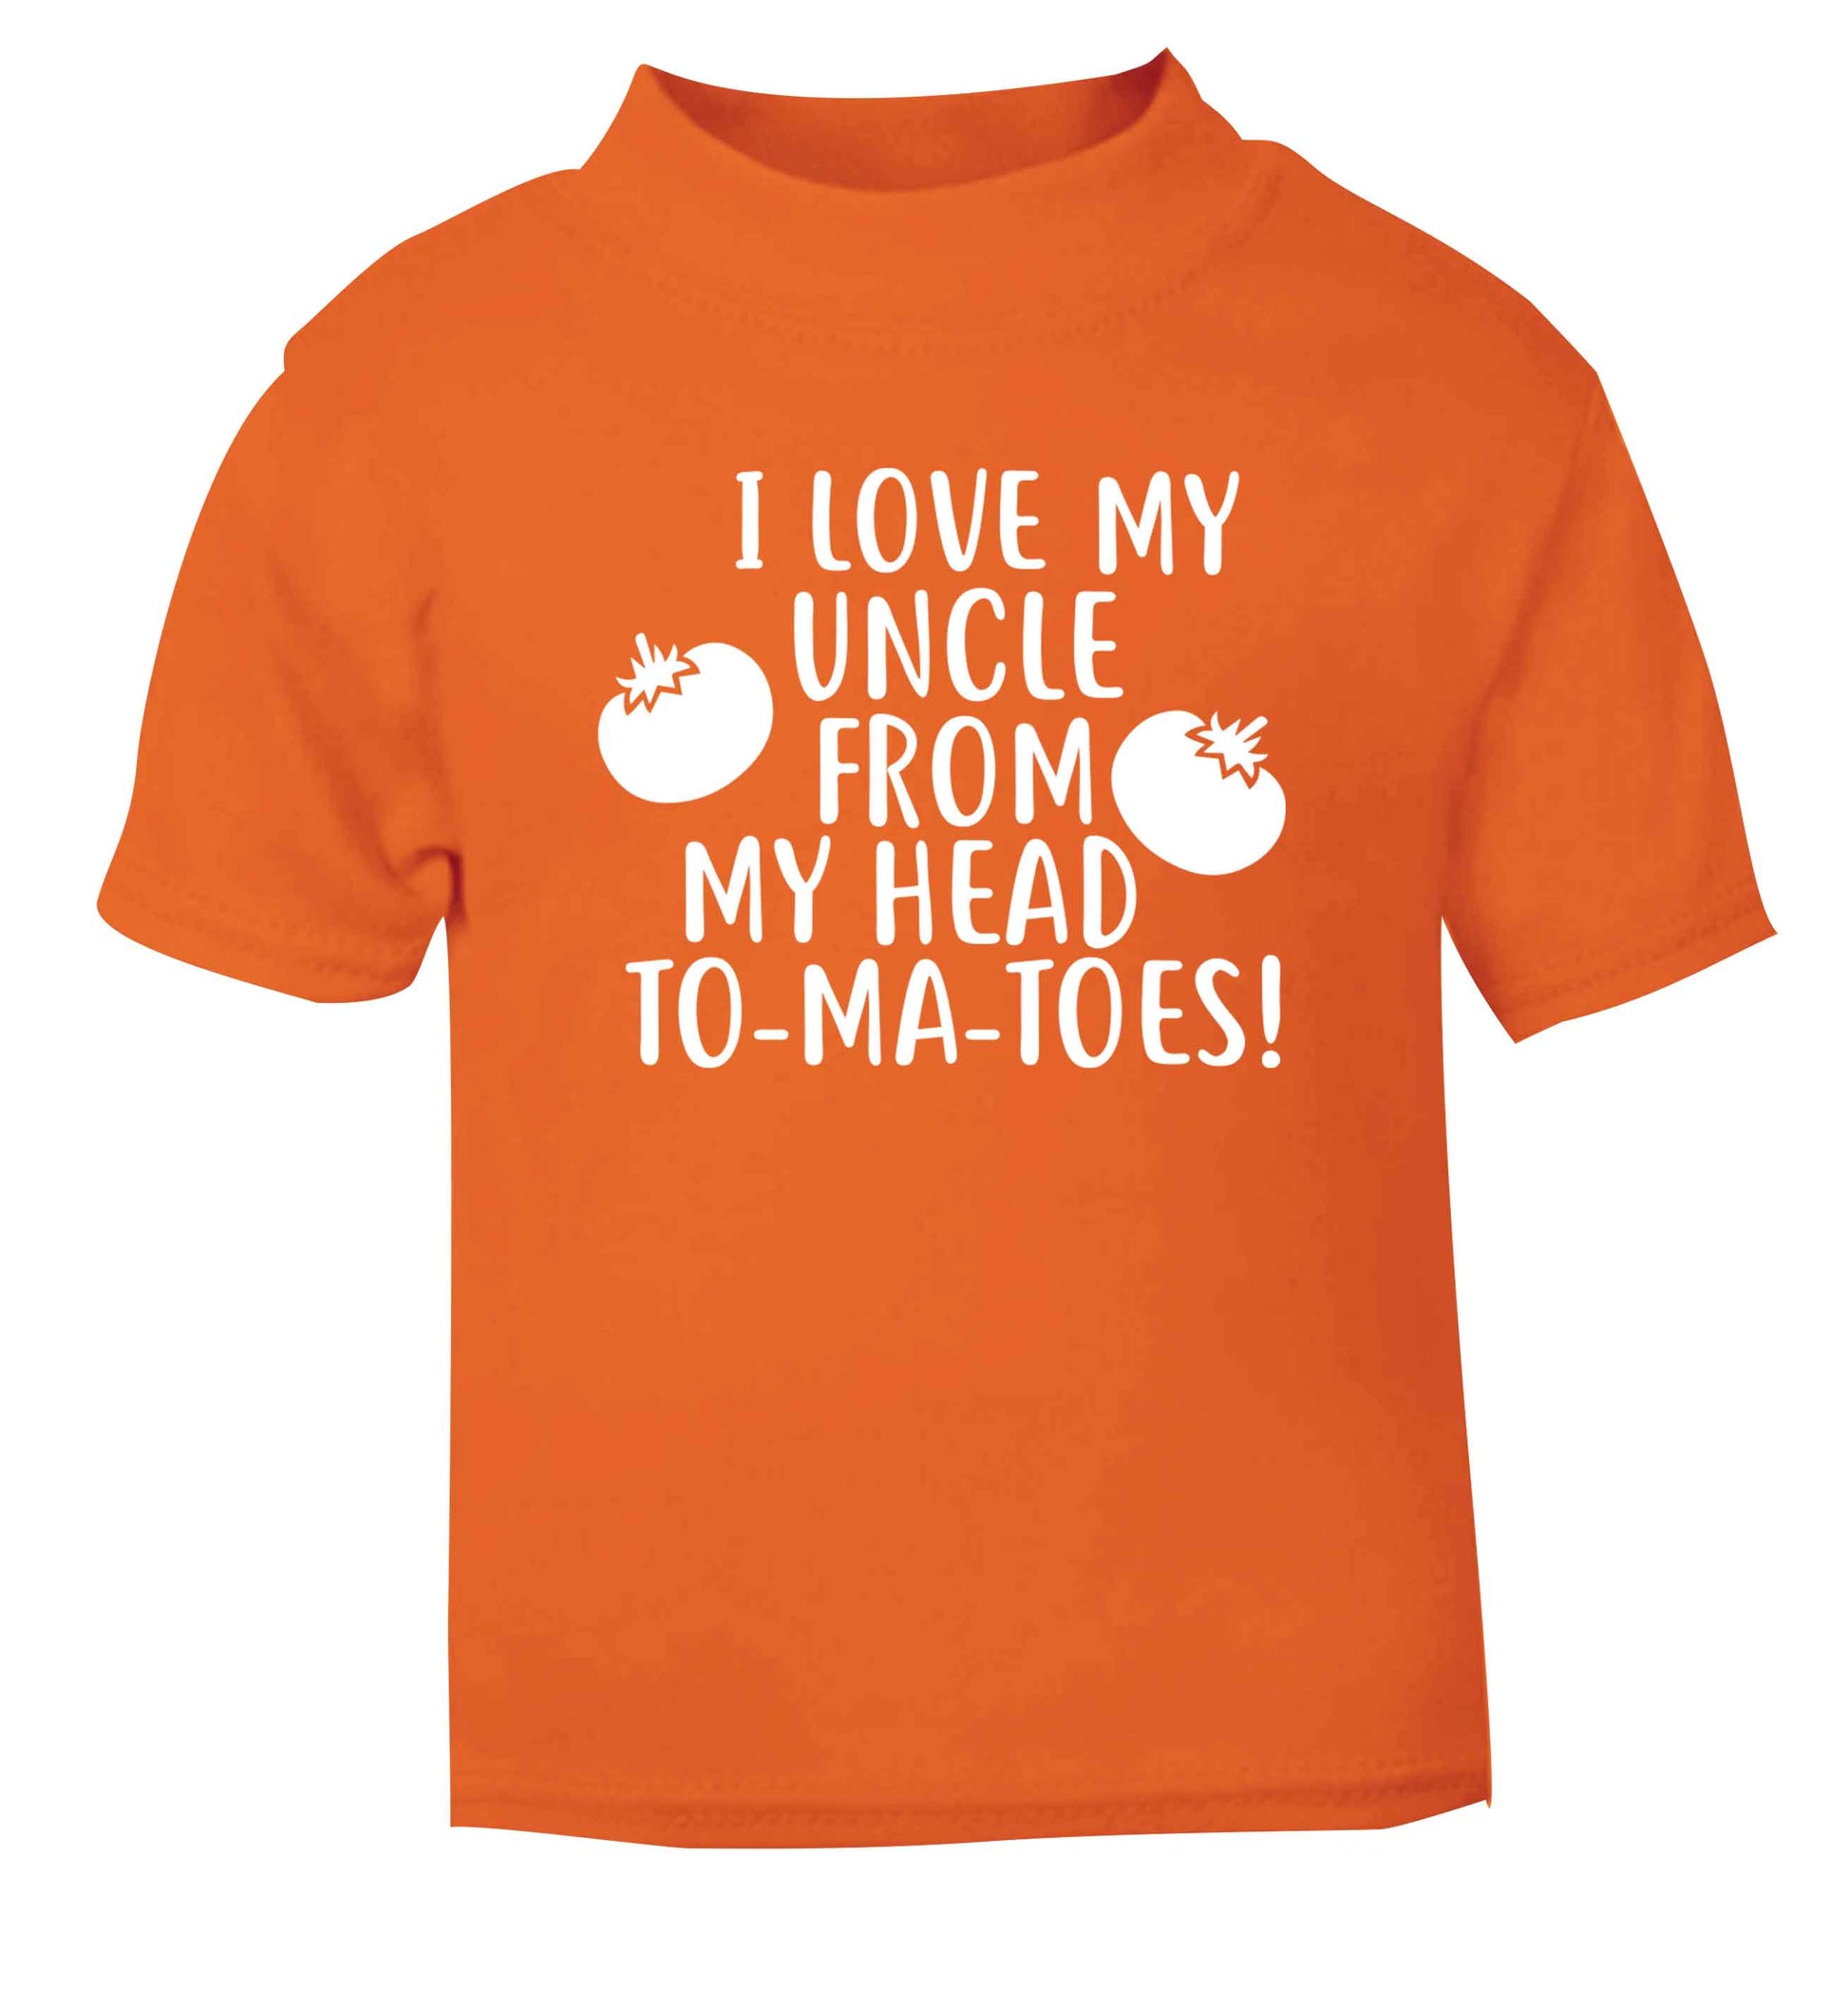 I love my uncle from my head To-Ma-Toes orange Baby Toddler Tshirt 2 Years